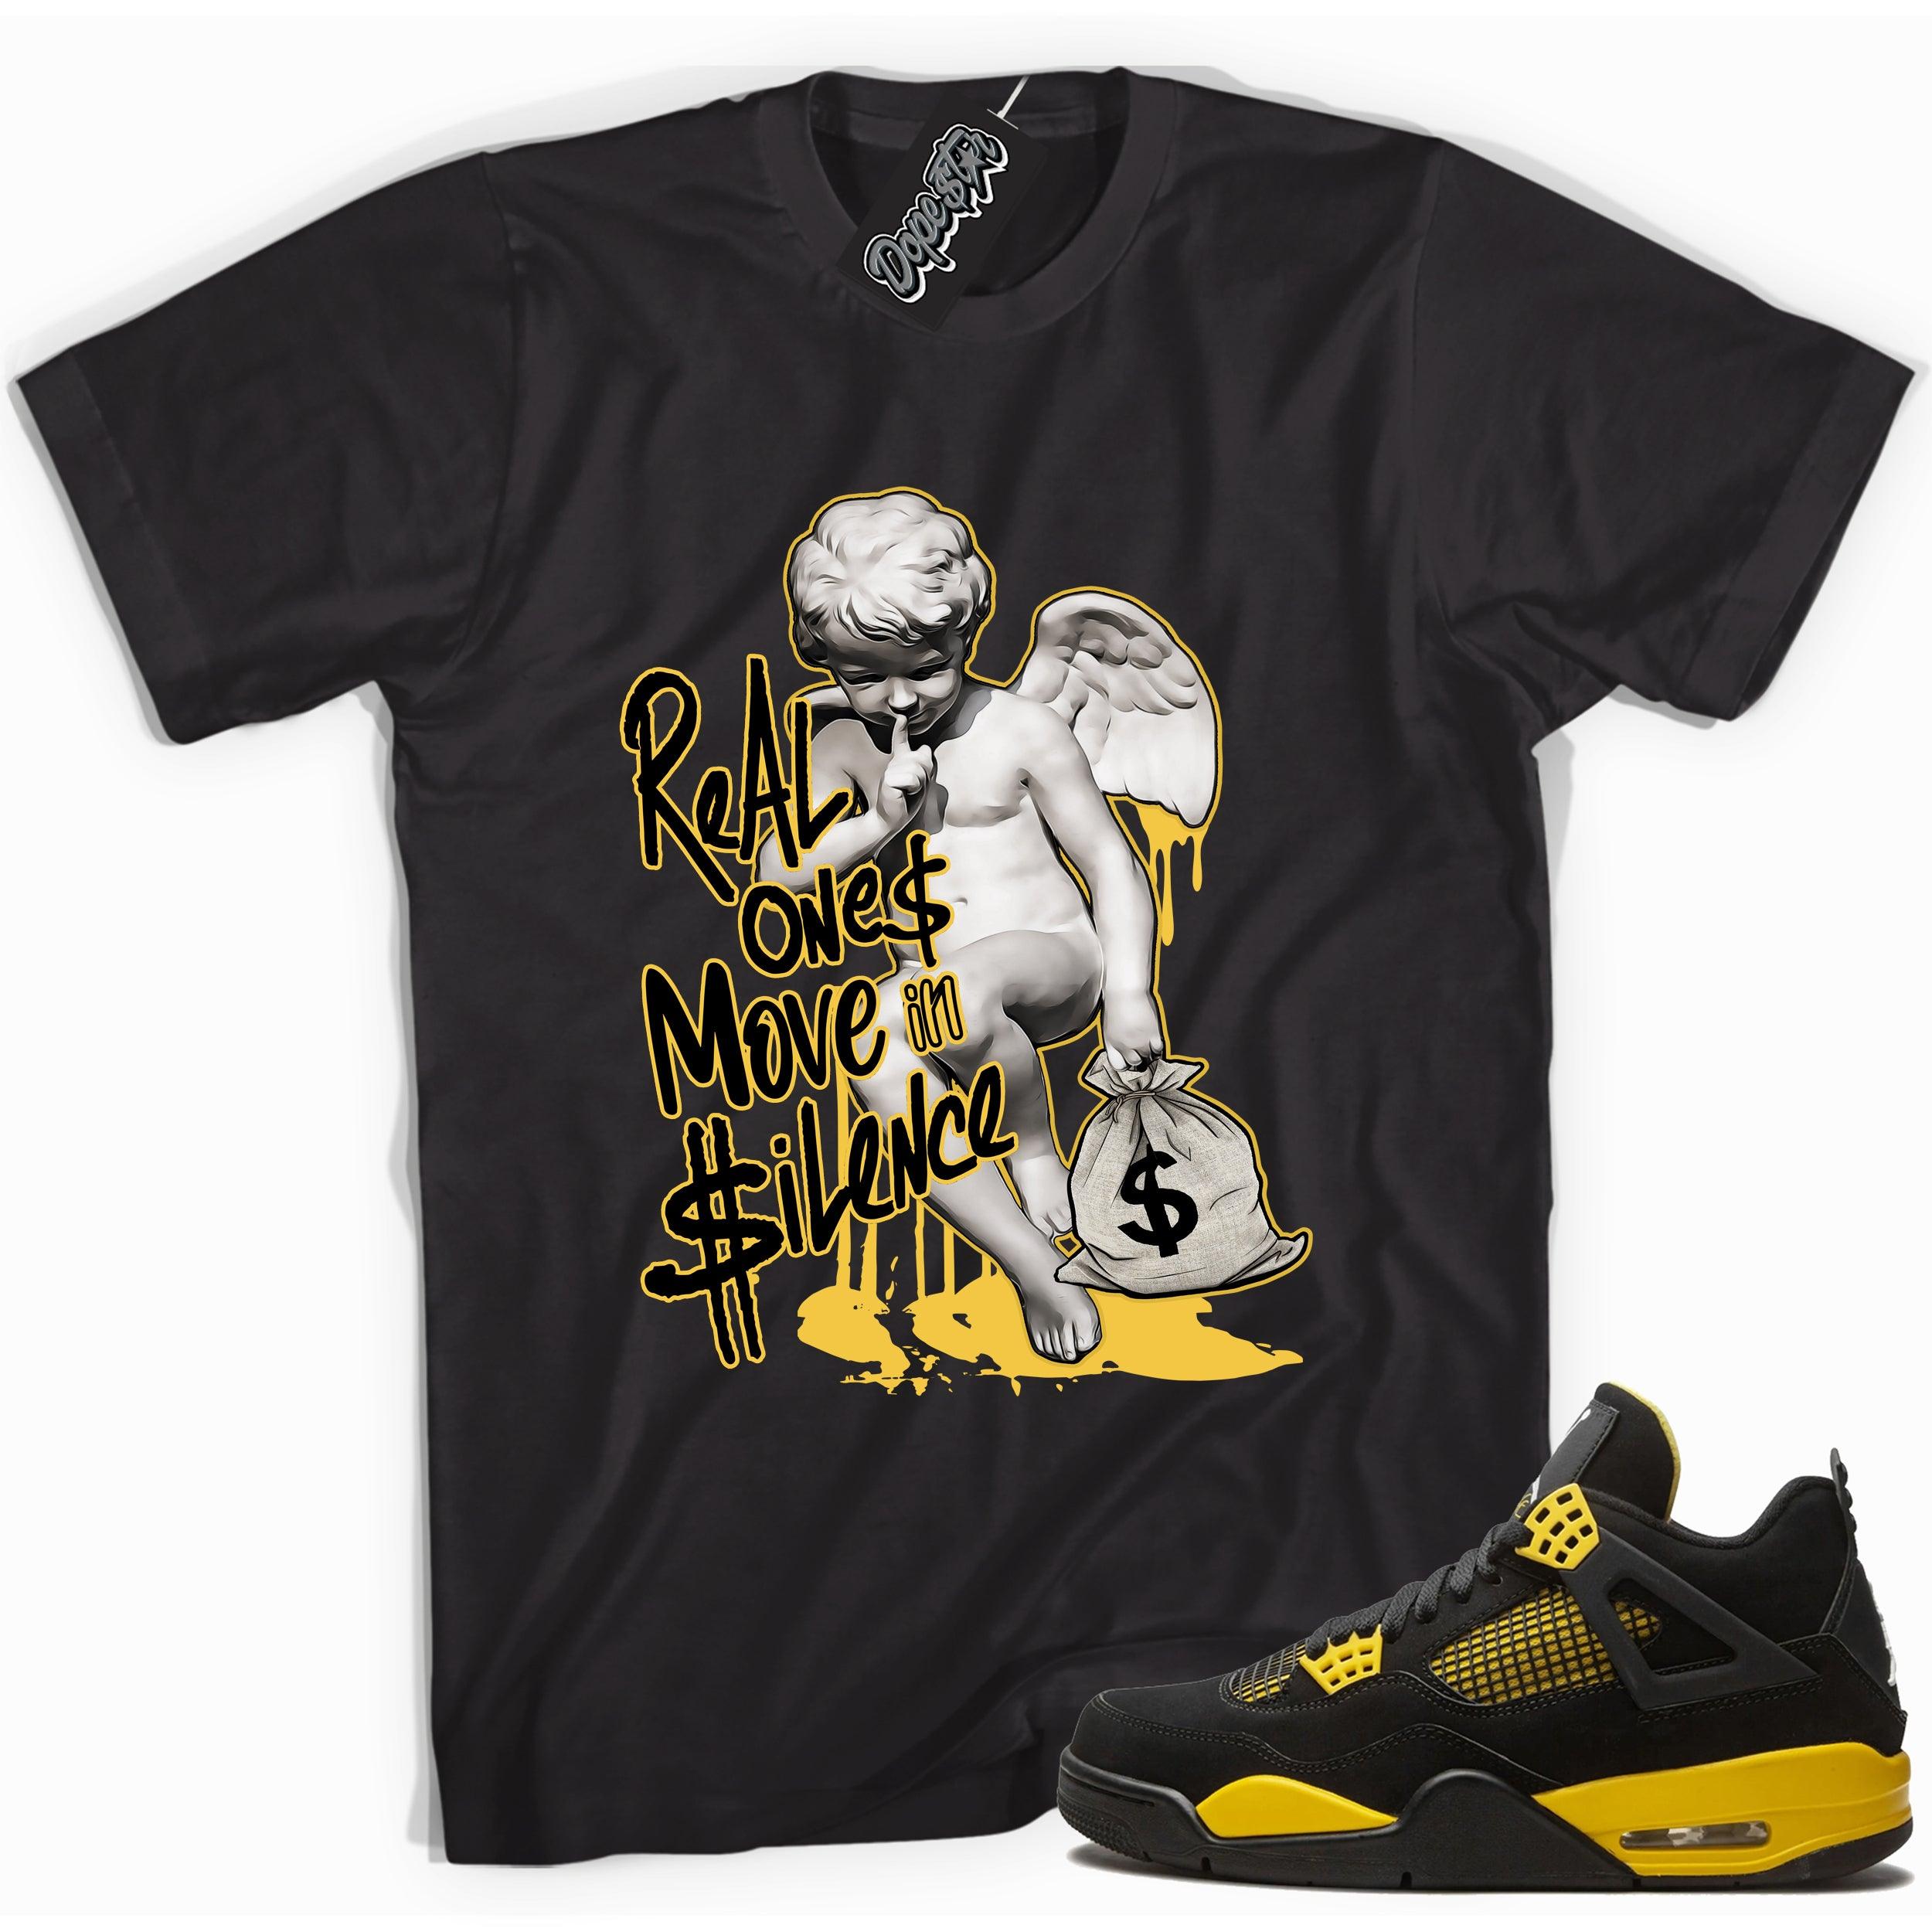 Cool black graphic tee with 'real ones move in silence' print, that perfectly matches  Air Jordan 4 Thunder sneakers